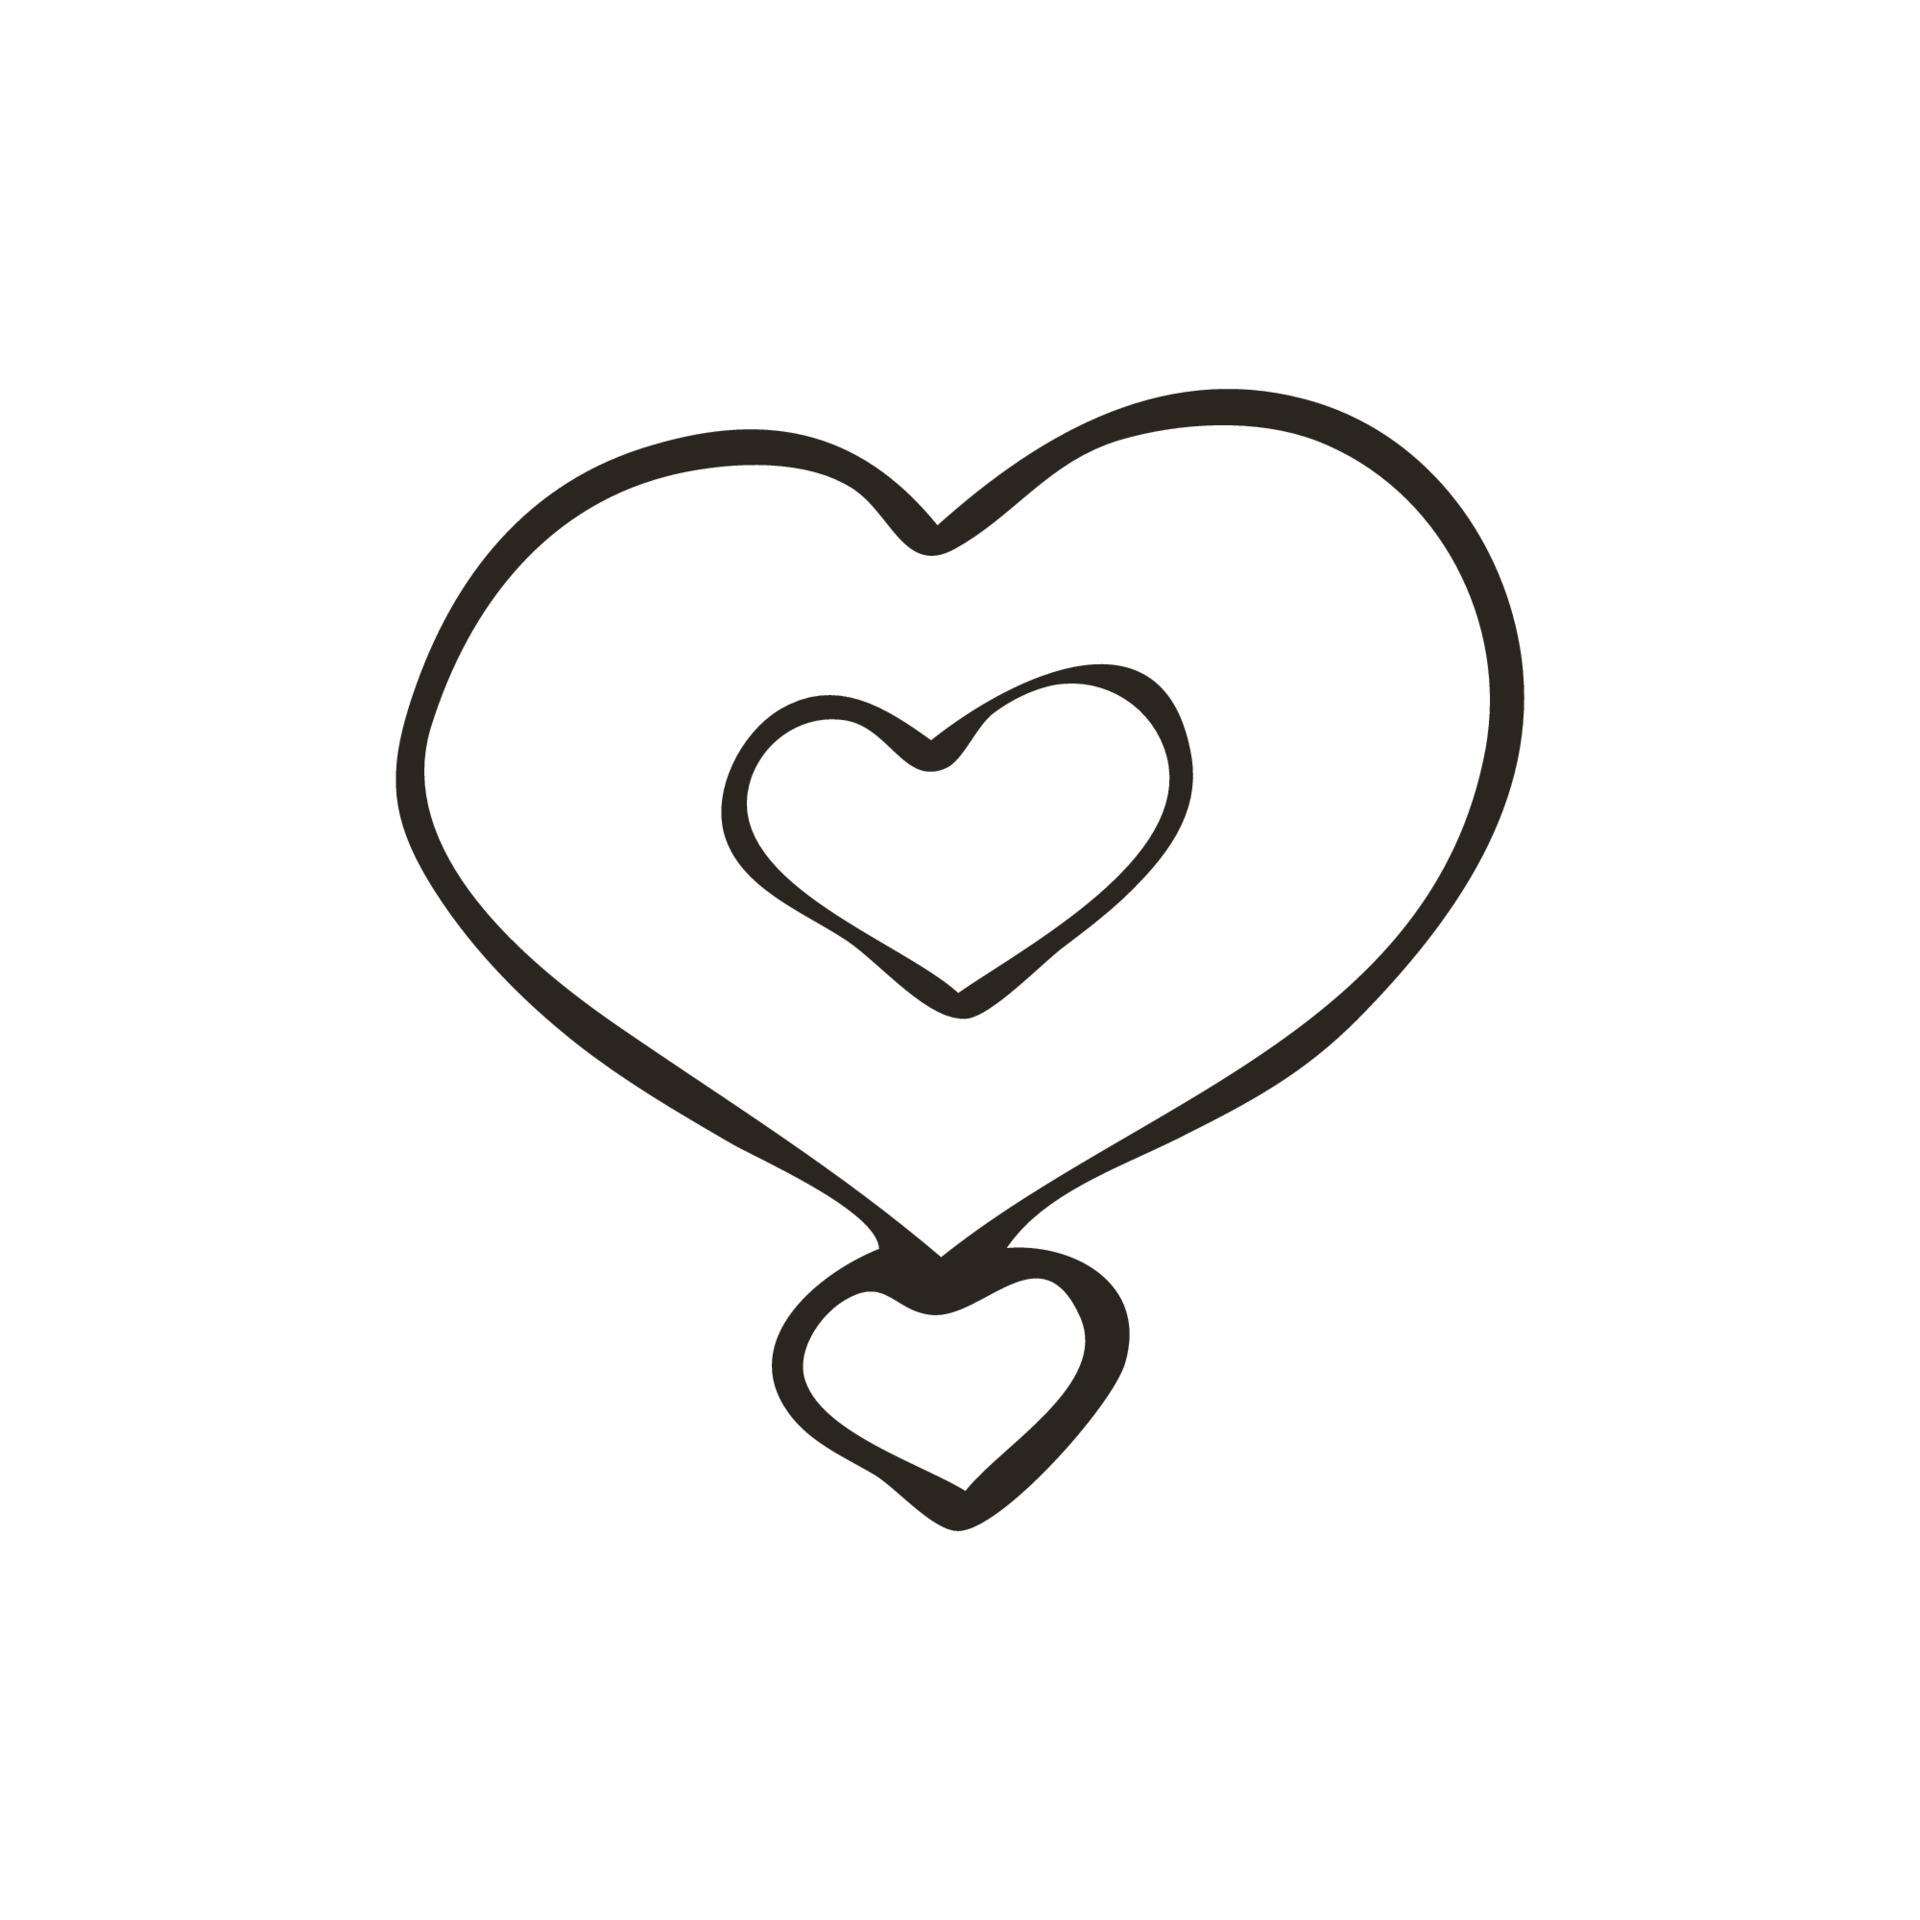 Doodle heart icon. Love symbol. Cute hand drawn graphic ...